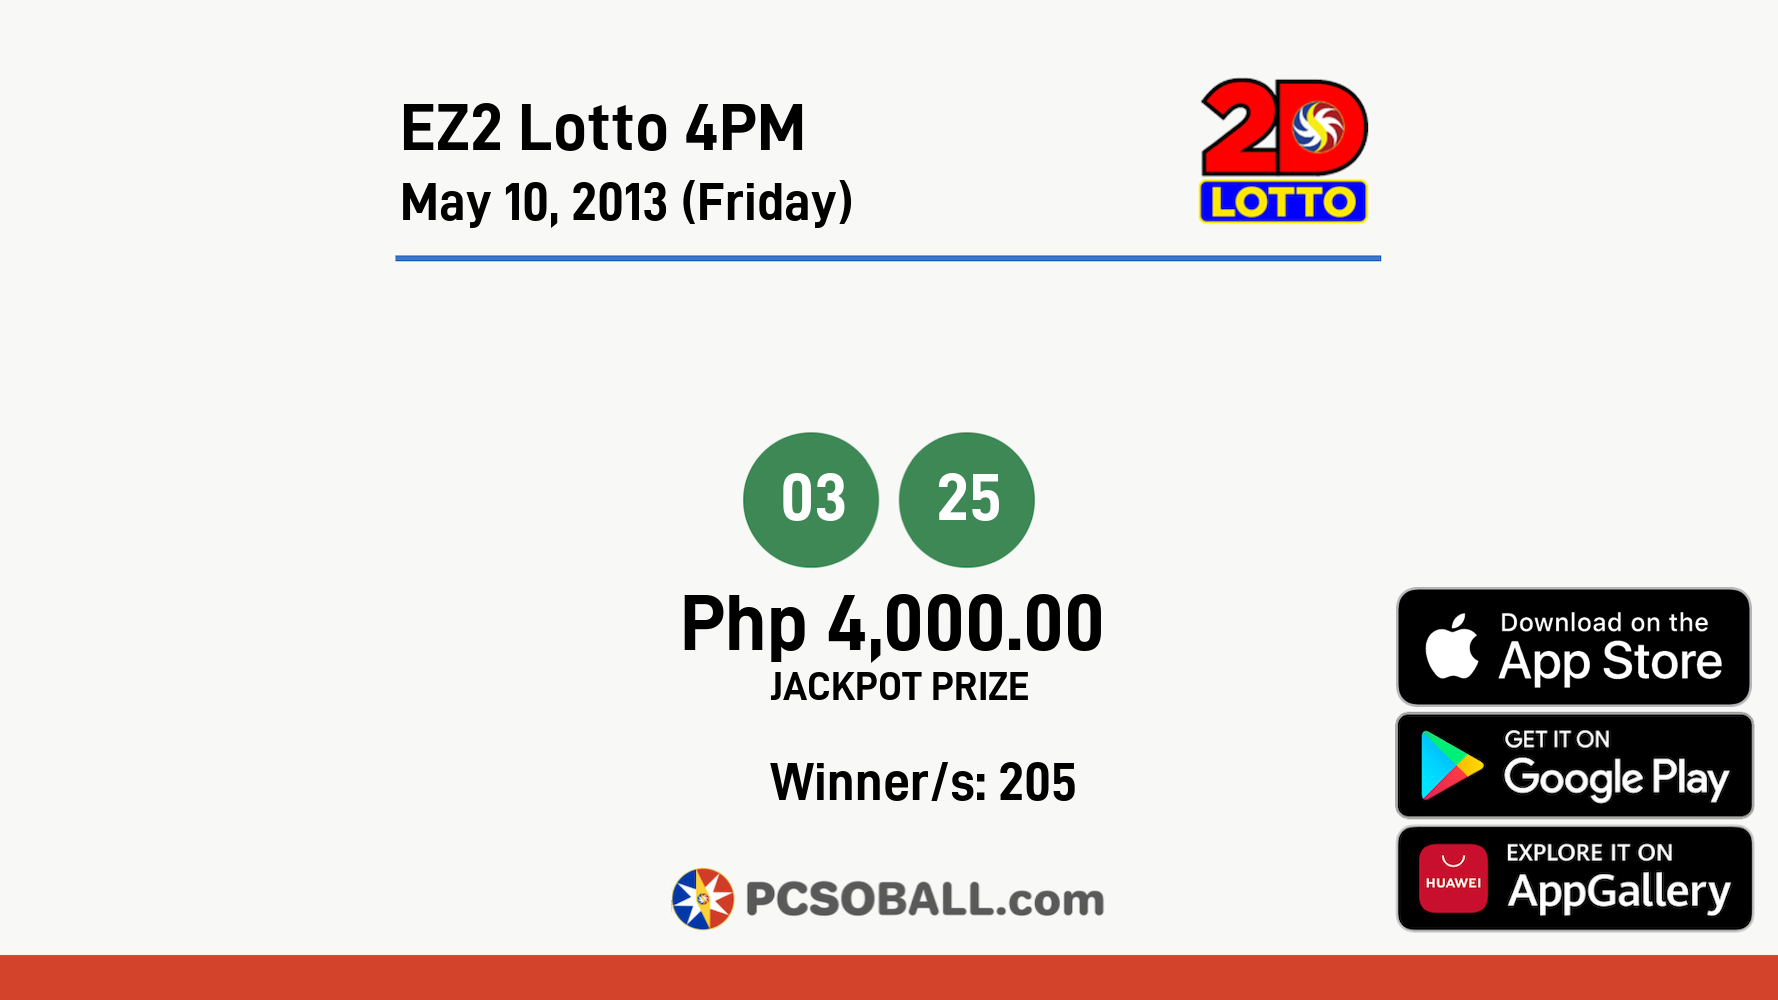 EZ2 Lotto 4PM May 10, 2013 (Friday) Result